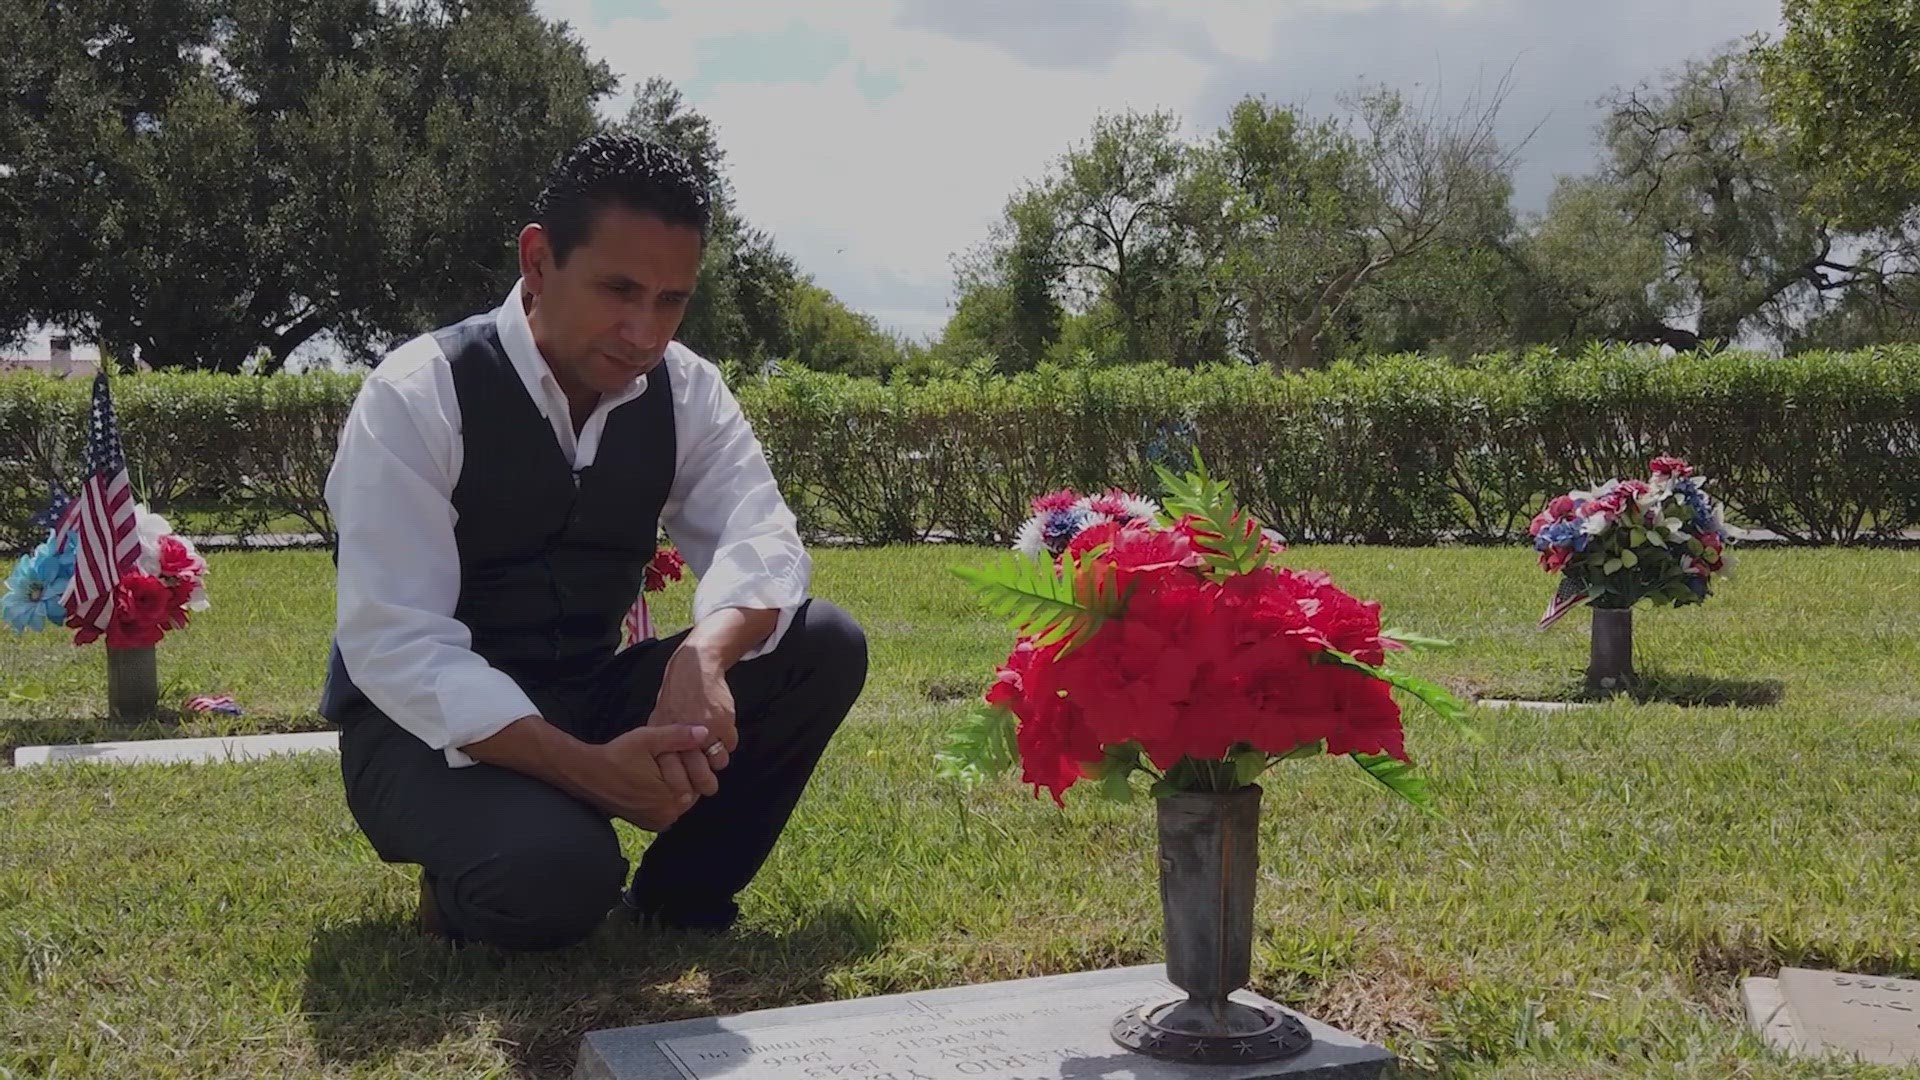 The film features Mario Ybarra from Weslaco, who never got to meet his father as a result of the Vietnam War, and the ripple effect such a tragedy can have.